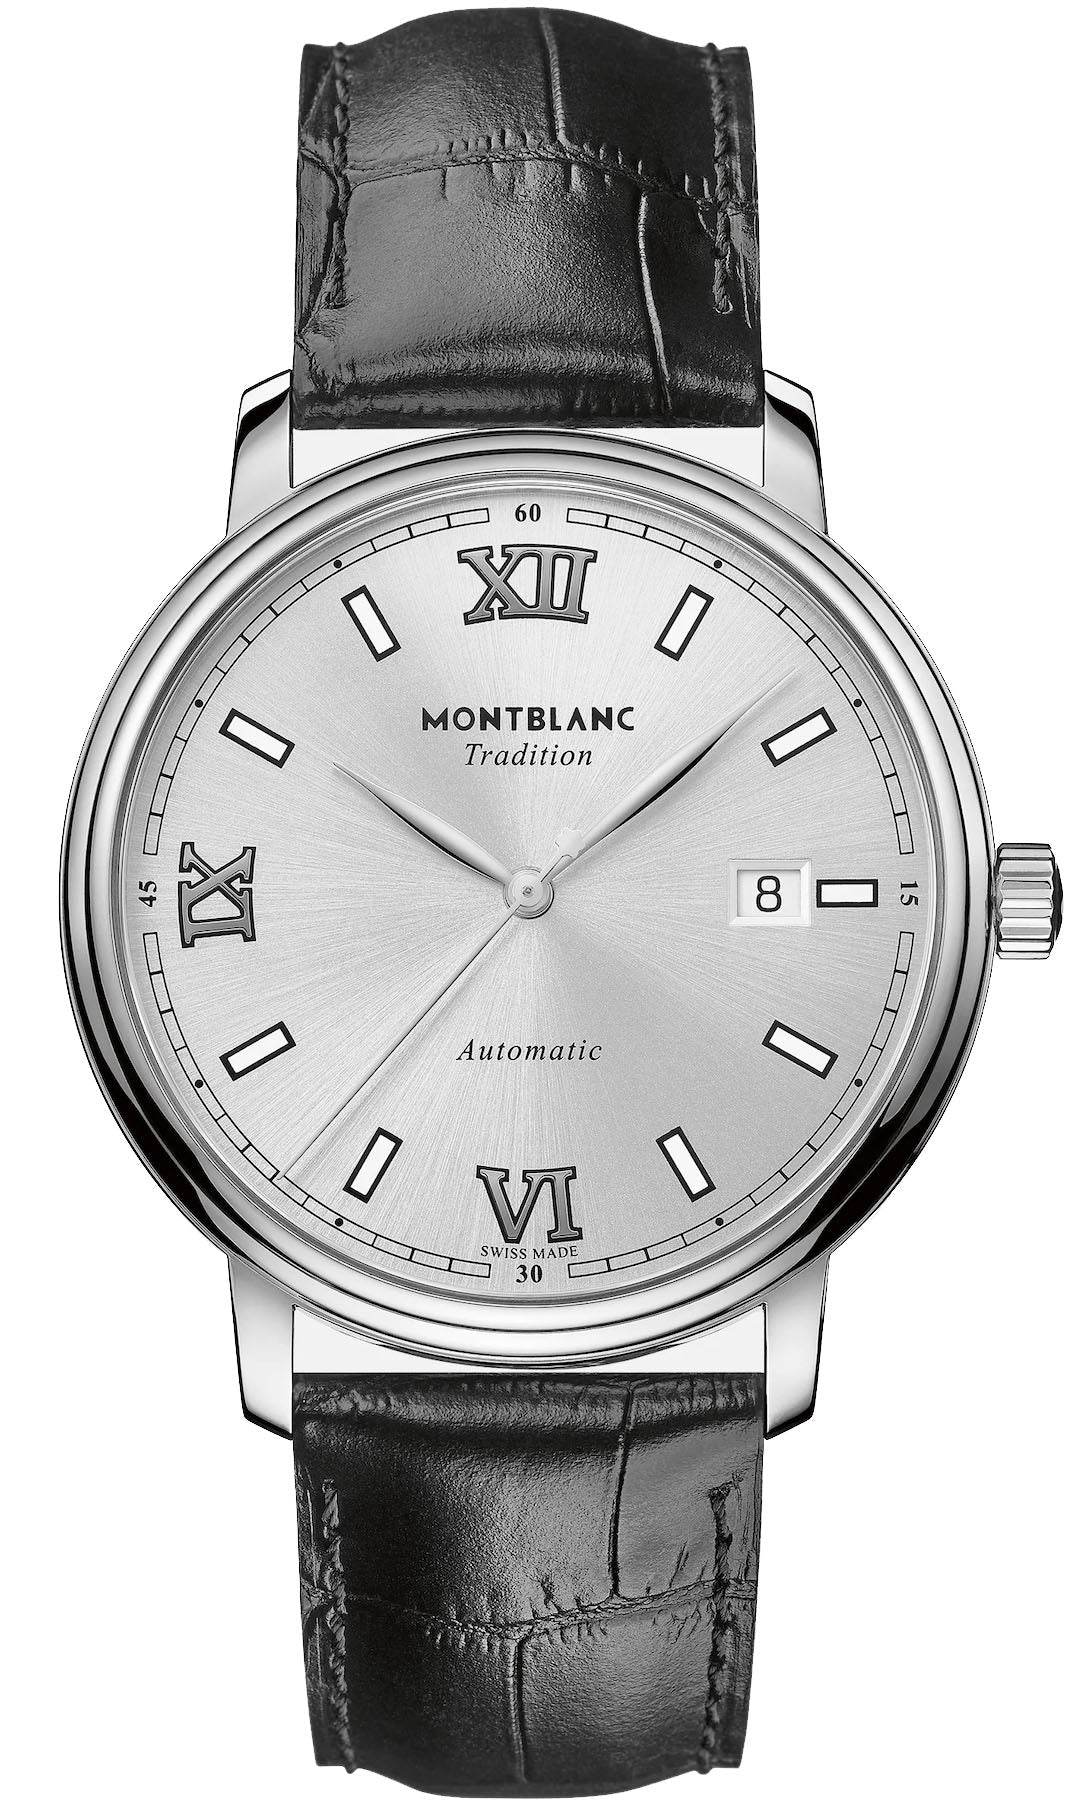 Photos - Wrist Watch Mont Blanc Montblanc Watch Tradition Automatic - Silver MNTB-045 